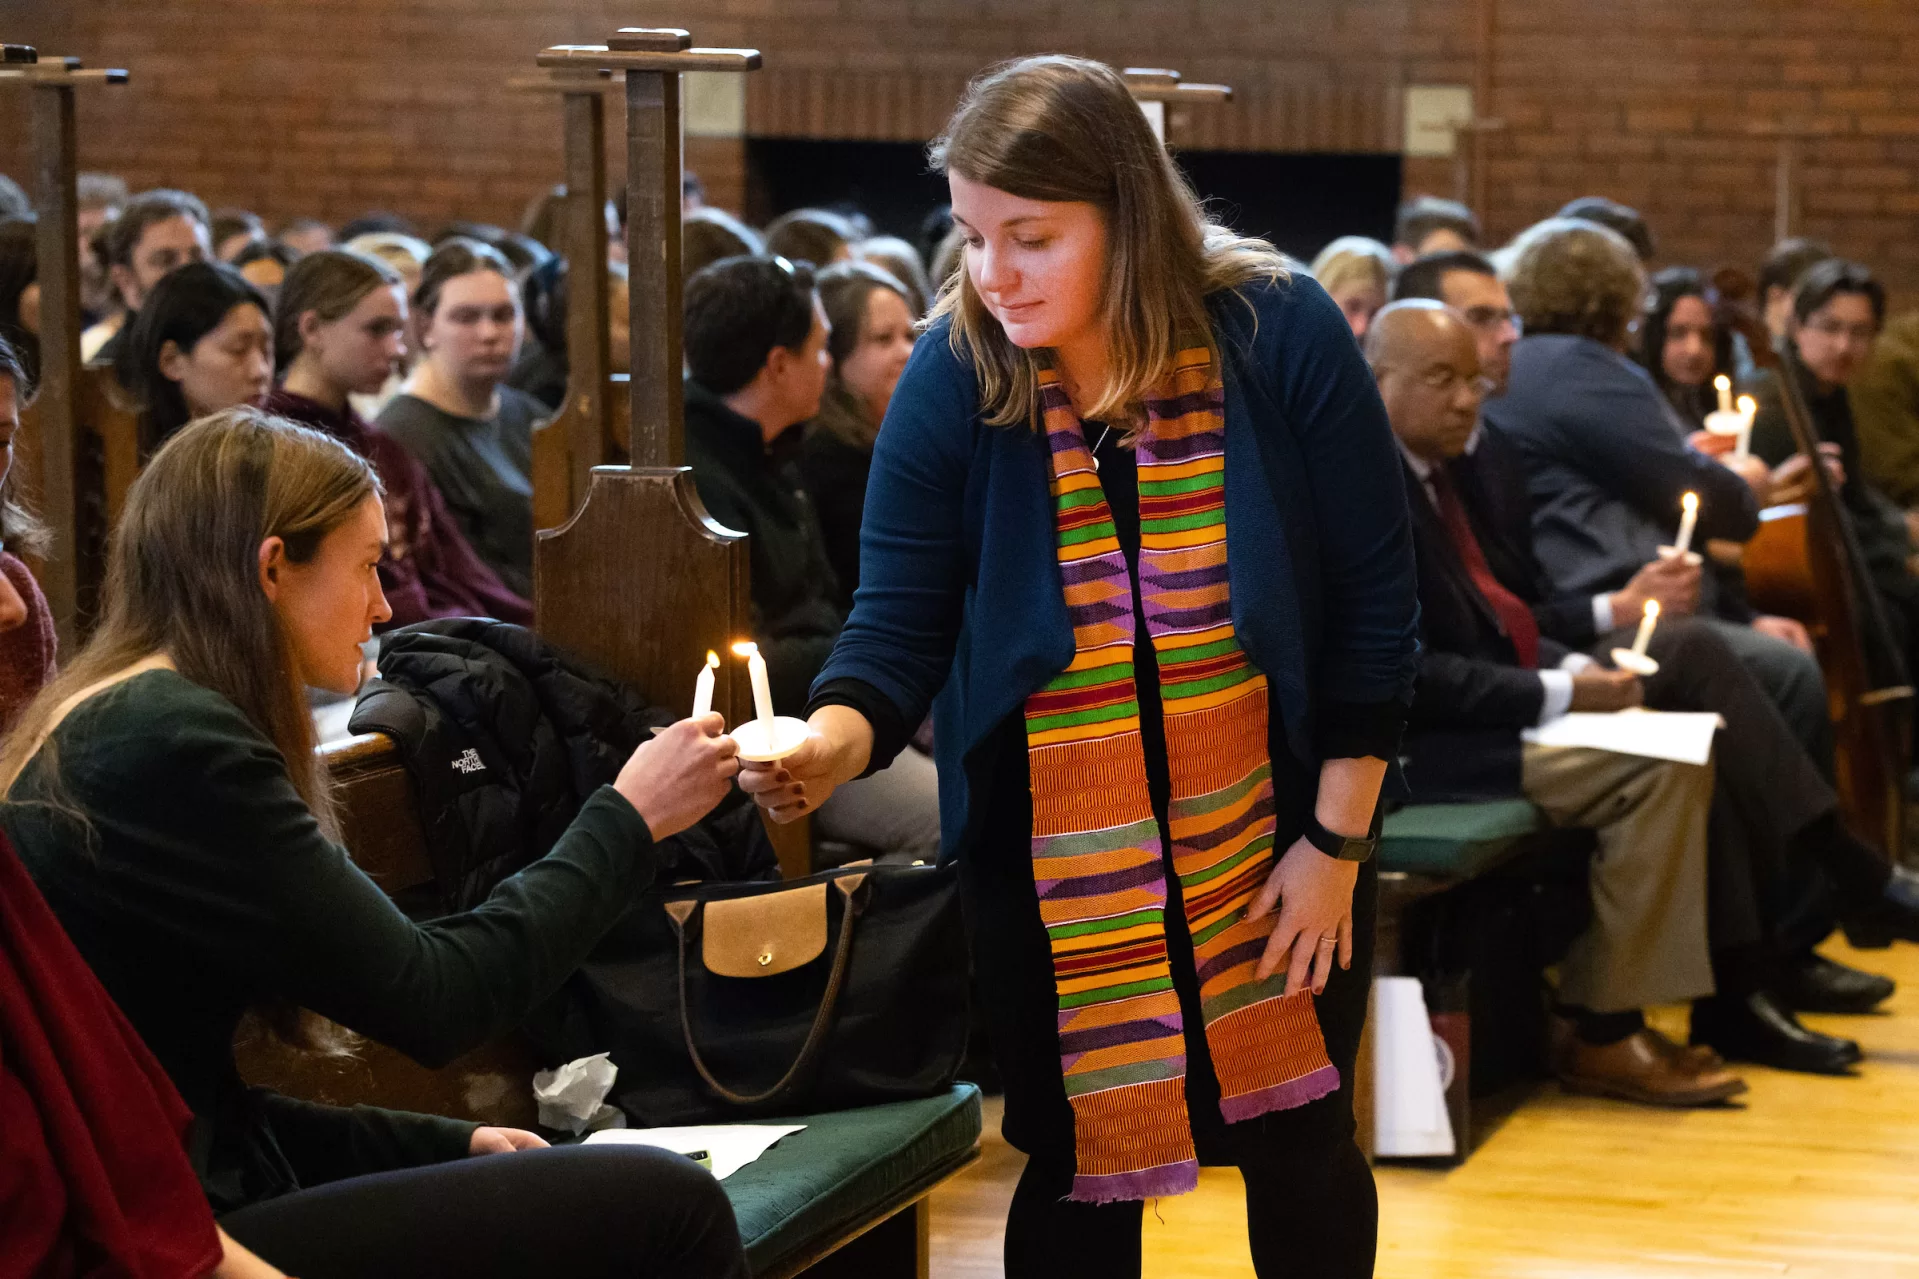 “The brightness that shines through the dark of a tragedy such as we have suffered here in Lewiston, our home, is what it always is in times like these: the immense capacity of our shared humanity,” said Bates President Garry W. Jenkins in his remarks during today’s Vigil for Grief and Remembrance, held at 4:30 p.m. in Gomes Chapel on the one-week anniversary of the shootings in Lewiston.

Led by the Rev. Brittany Longsdorf, the college’s multifaith chaplain, the vigil gave the campus community an opportunity to come together for silence, candle lighting, poetry, and interfaith prayers, and, ultimately, to share communal grief with their Lewiston community.
Welcome & Naming Grief: Brittany Longsdorf, 
Multifaith Chaplain and Visiting Lecturer in the Humanities

Bates President Garry W. Jenkins Remarks

Lewiston Mayor Carl Sheline’s Remarks 

Invitation for Sharing: Brittany Longsdorf

*Barry Music* (single floor mic, guitar output)

Reading of the Names: Brittany Longsdorf and Raymond Clothier, associate multifaith chaplain
•	Tricia C. Asselin
•	Peyton Brewer-Ross
•	William Frank Brackett
•	Thomas Ryan Conrad
•	Michael R. Deslauriers II
•	Maxx A. Hathaway
•	Bryan M. MacFarlane
•	Keith D. Macneir
•	Ronald G. Morin
•	Joshua A. Seal
•	Arthur Fred Strout
•	Stephen M. Vozzella
•	Lucille M. Violette
•	Robert E. Violette
•	Joseph Lawrence Walker
•	Jason Adam Walker
•	William A. Young
•	Aaron Young
*moment  of silence* & closing, begin to pass candle lighting 

READINGS (all from Lectern mic unless noted)
Aneeza Ahmad ‘25 of Sharon, Mass., and Alaina Rauf ‘25 of Yarmouth, Me., of the Bates Muslim Student Association 
Sophie Leight ‘26 of Easton, Md.
Venerable Tenzin Dasel, ‘88 - volunteer spiritual advisor and founder of the Maine Mindfulness Project and is an active retreat leader and speaker in the International Network of Engaged Buddhists 
Levi Mindlin ‘24 of Portland, Ore - song (single floor mic, guitar output)